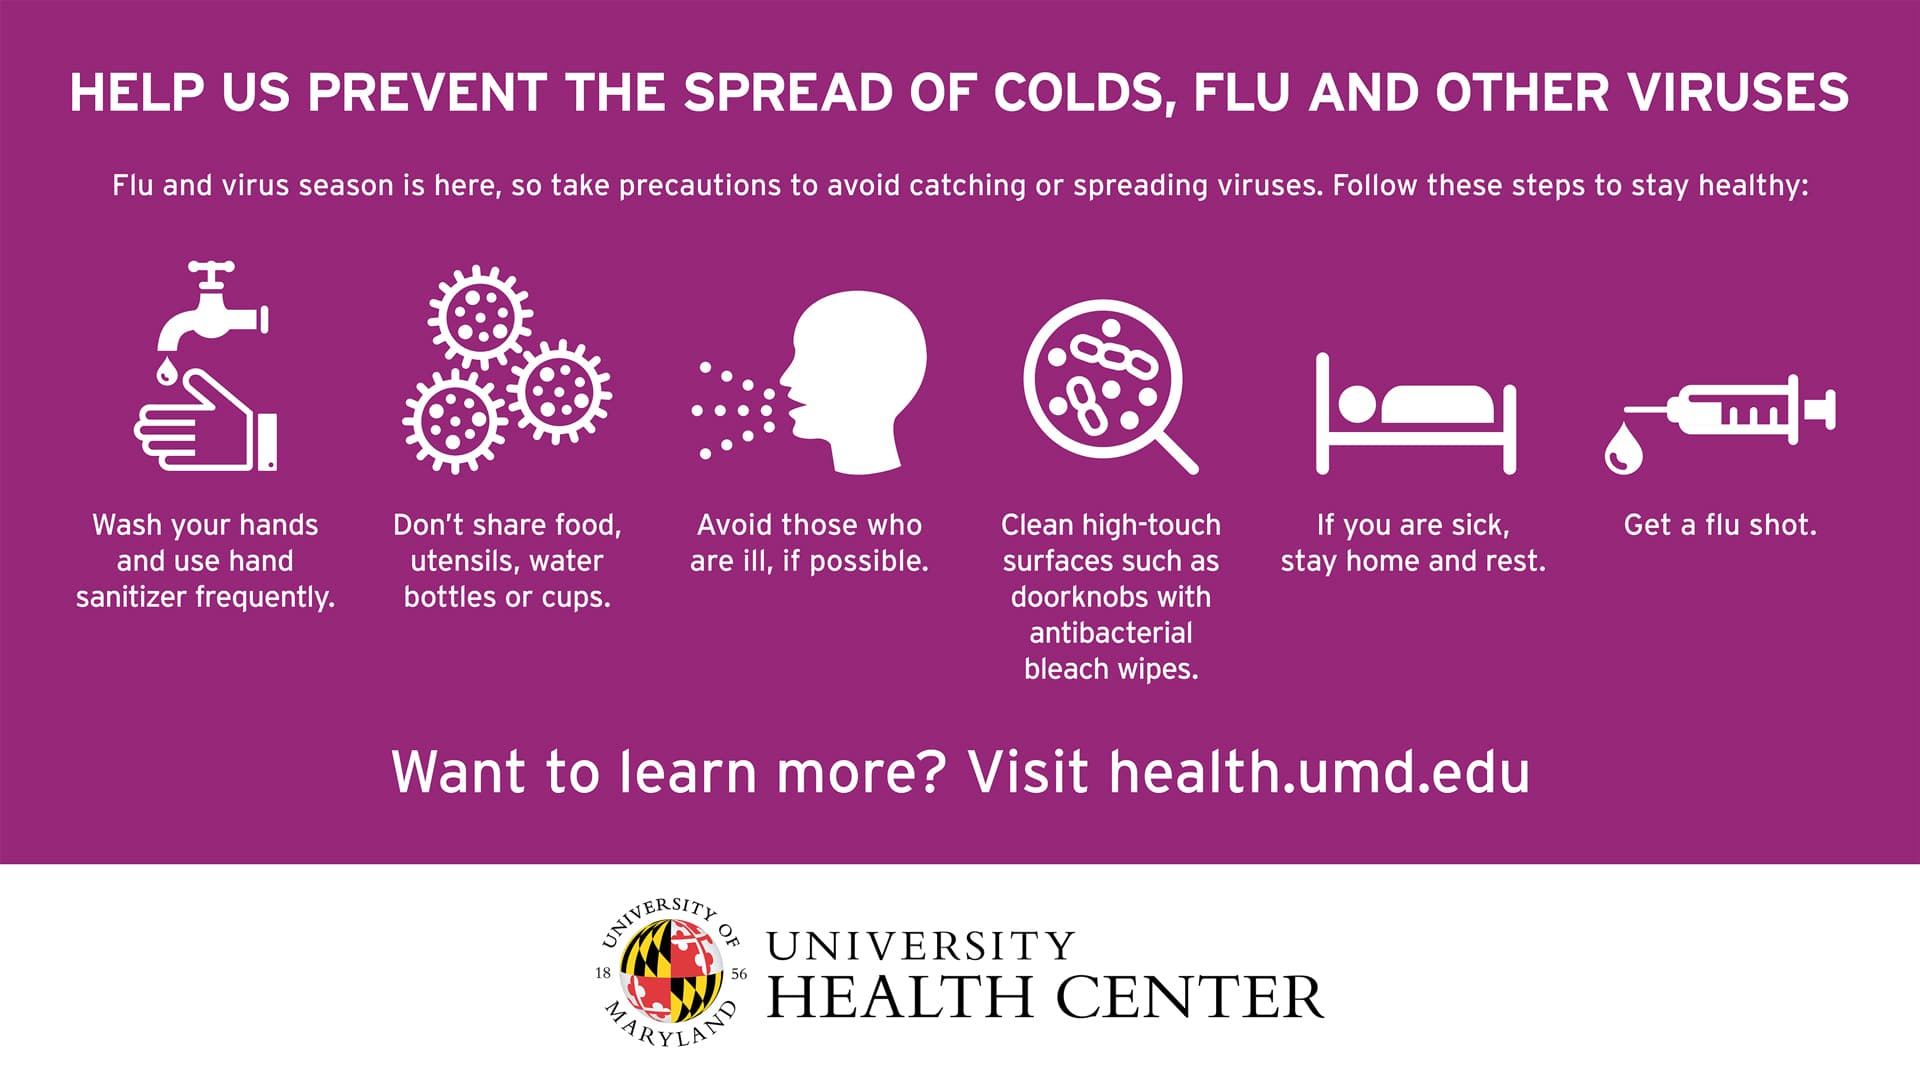 Help us prevent the spread of cold, flu and other viruses. Want to Learn More? Visit health.umd.edu